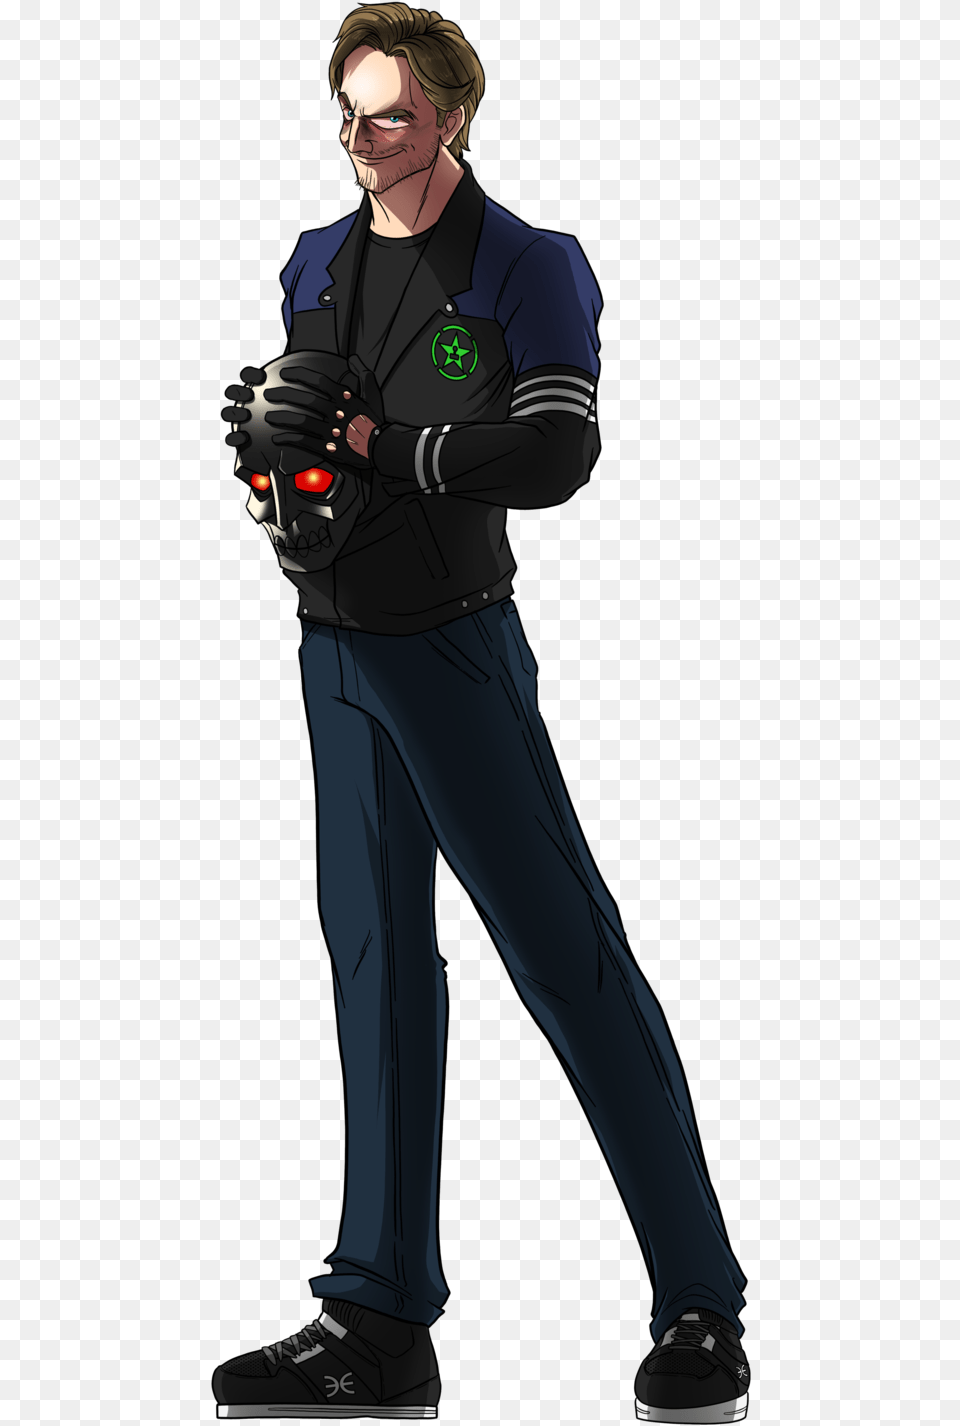 Ryan Haywood By Vonmatrix5000 On Rooster Teeth Gta, Person, Clothing, People, Pants Png Image